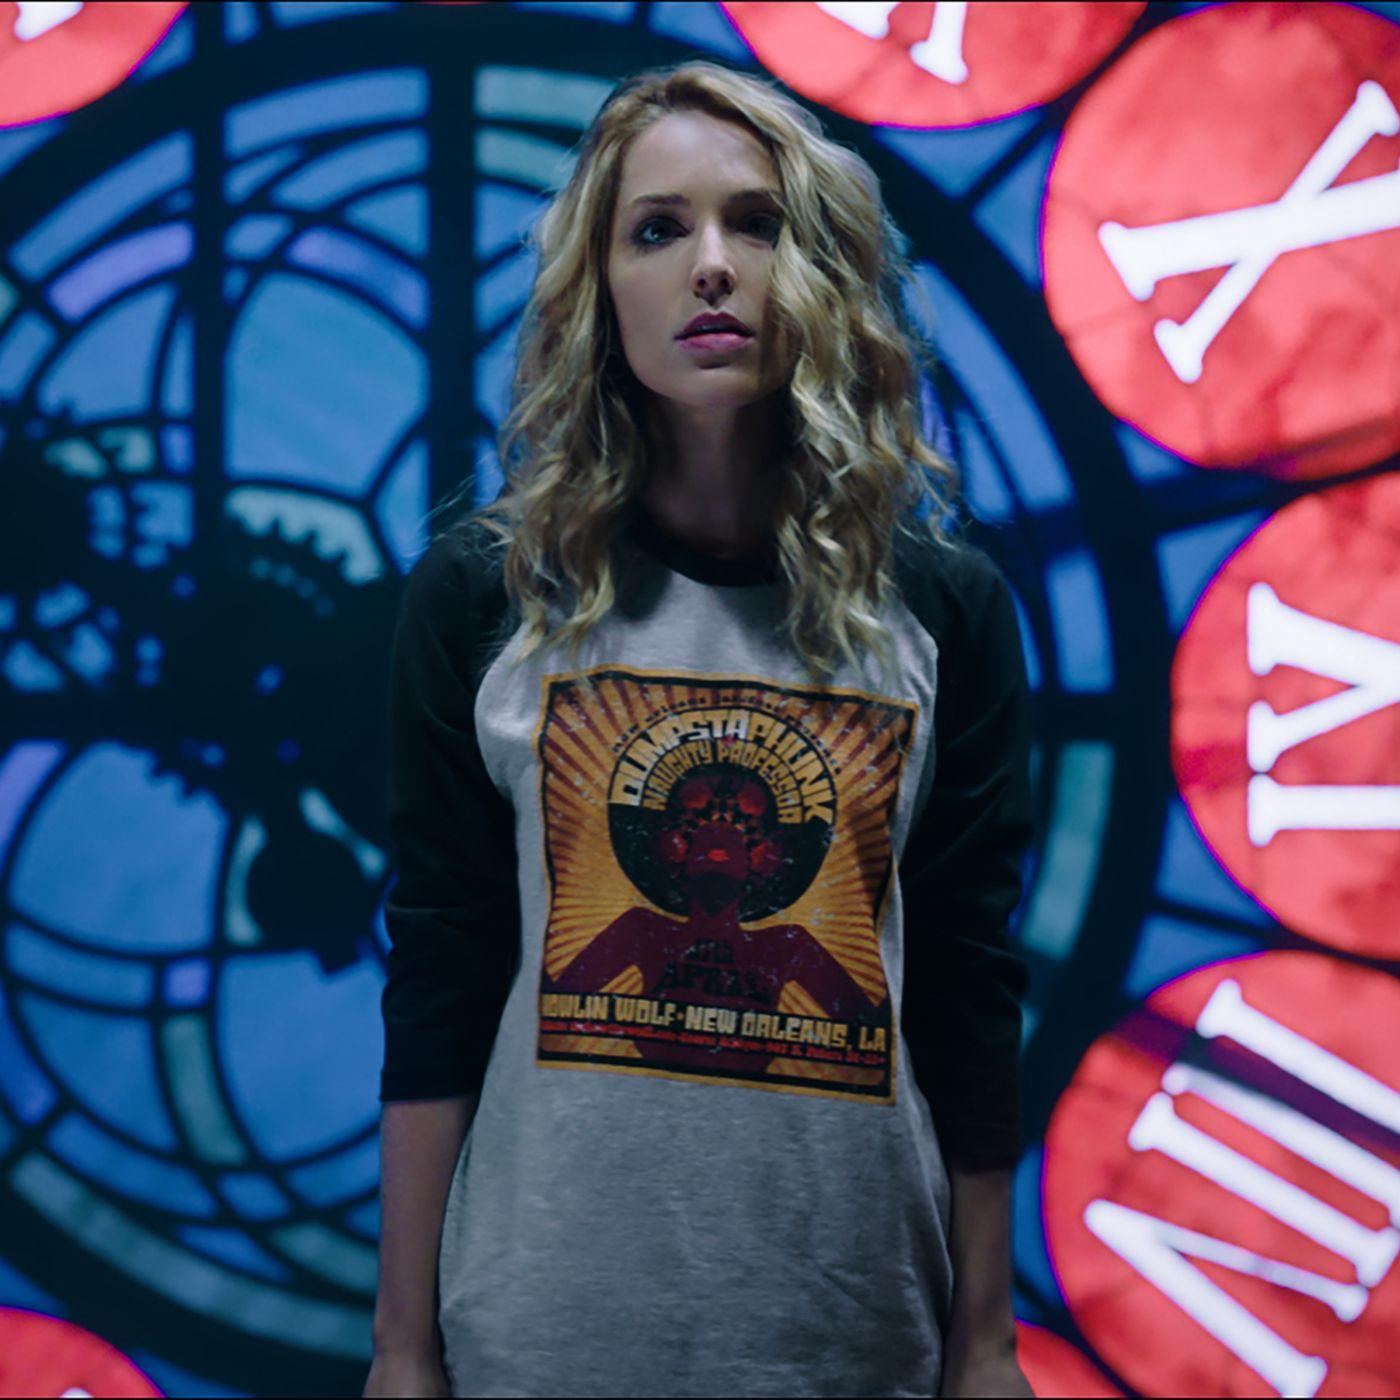 Happy Death Day 2U's after credits scene teases future of the franchise